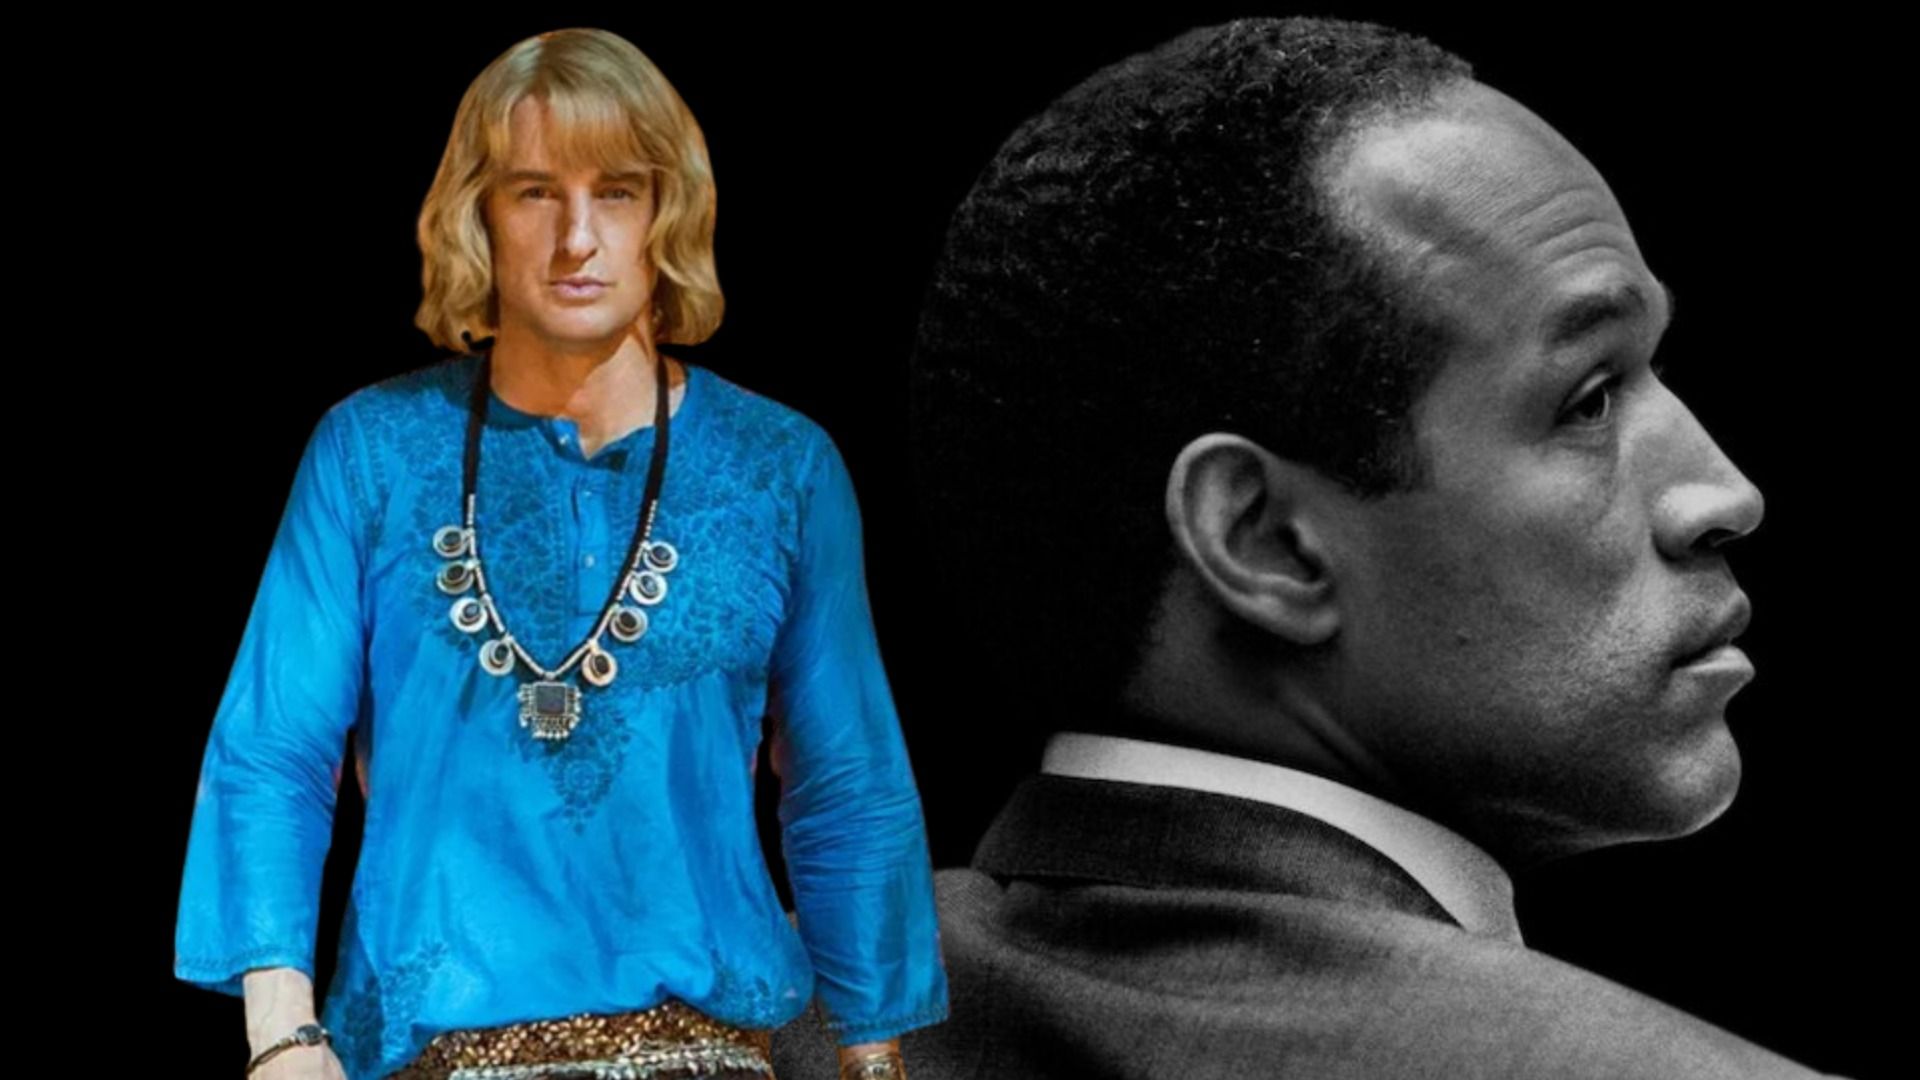 Owen Wilson in Zoolander with O.J. Simpson in Made in America